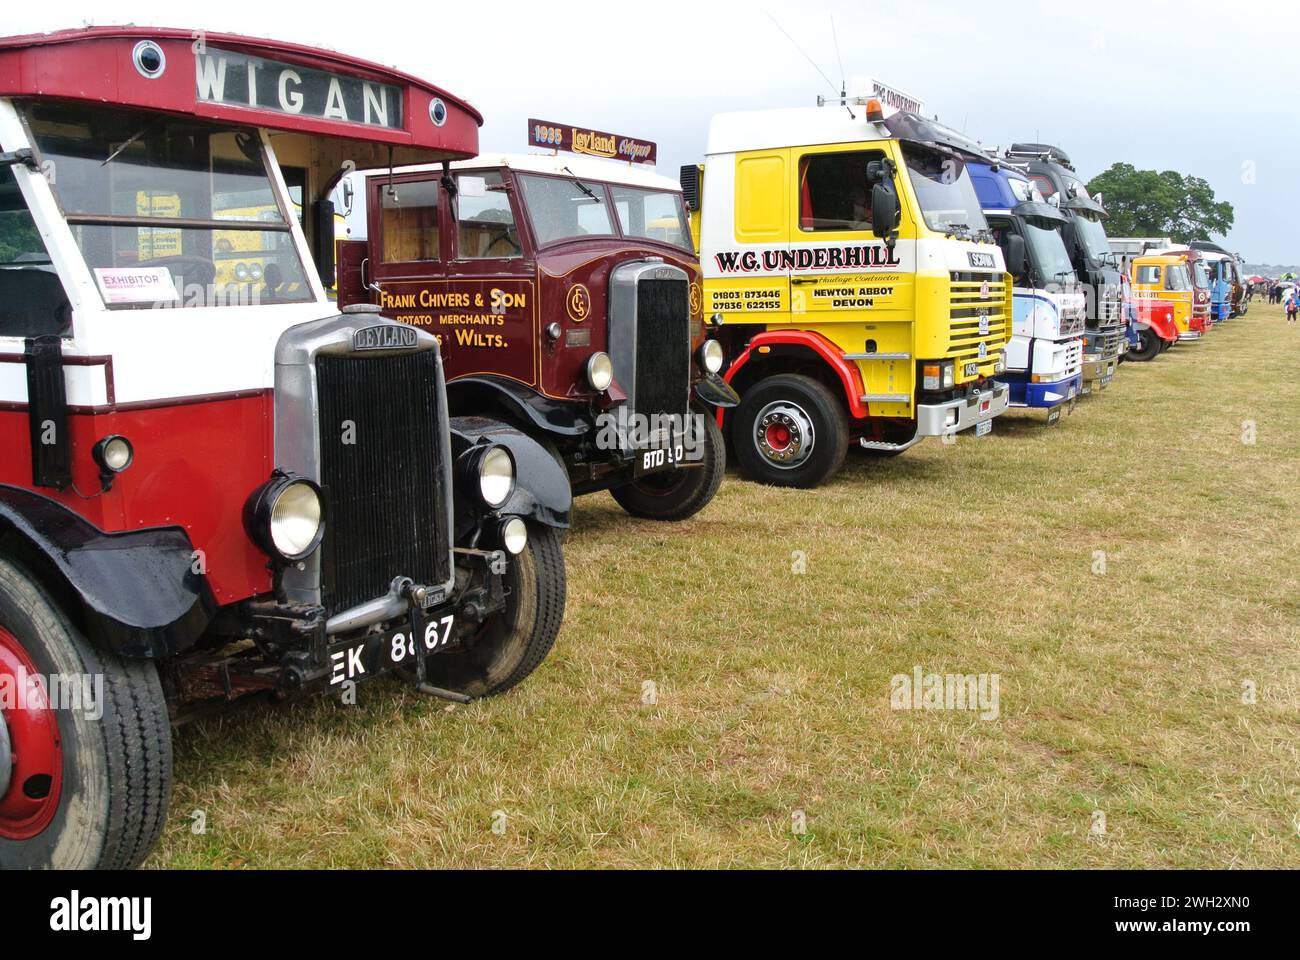 A line of classic commercial lorries parked on display at the 48th Historic Vehicle Gathering classic car show, Powderham, Devon, England, UK. Stock Photo